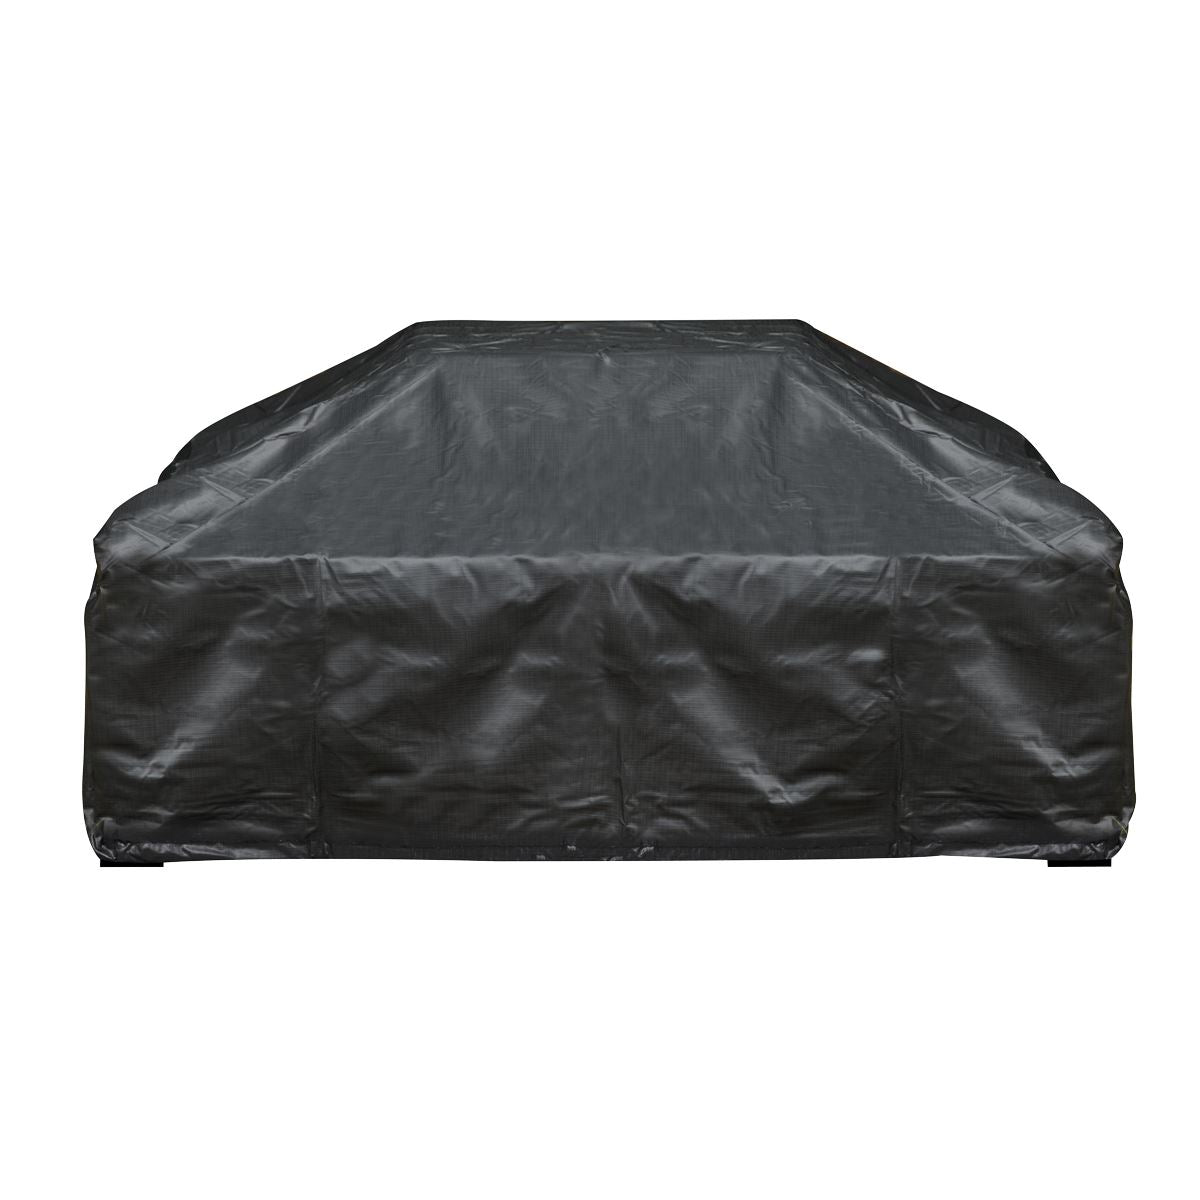 Dellonda 35" Square Outdoor Fire Pit, Mesh Screen Lid, Black with Water Resistant Drawstring Cover